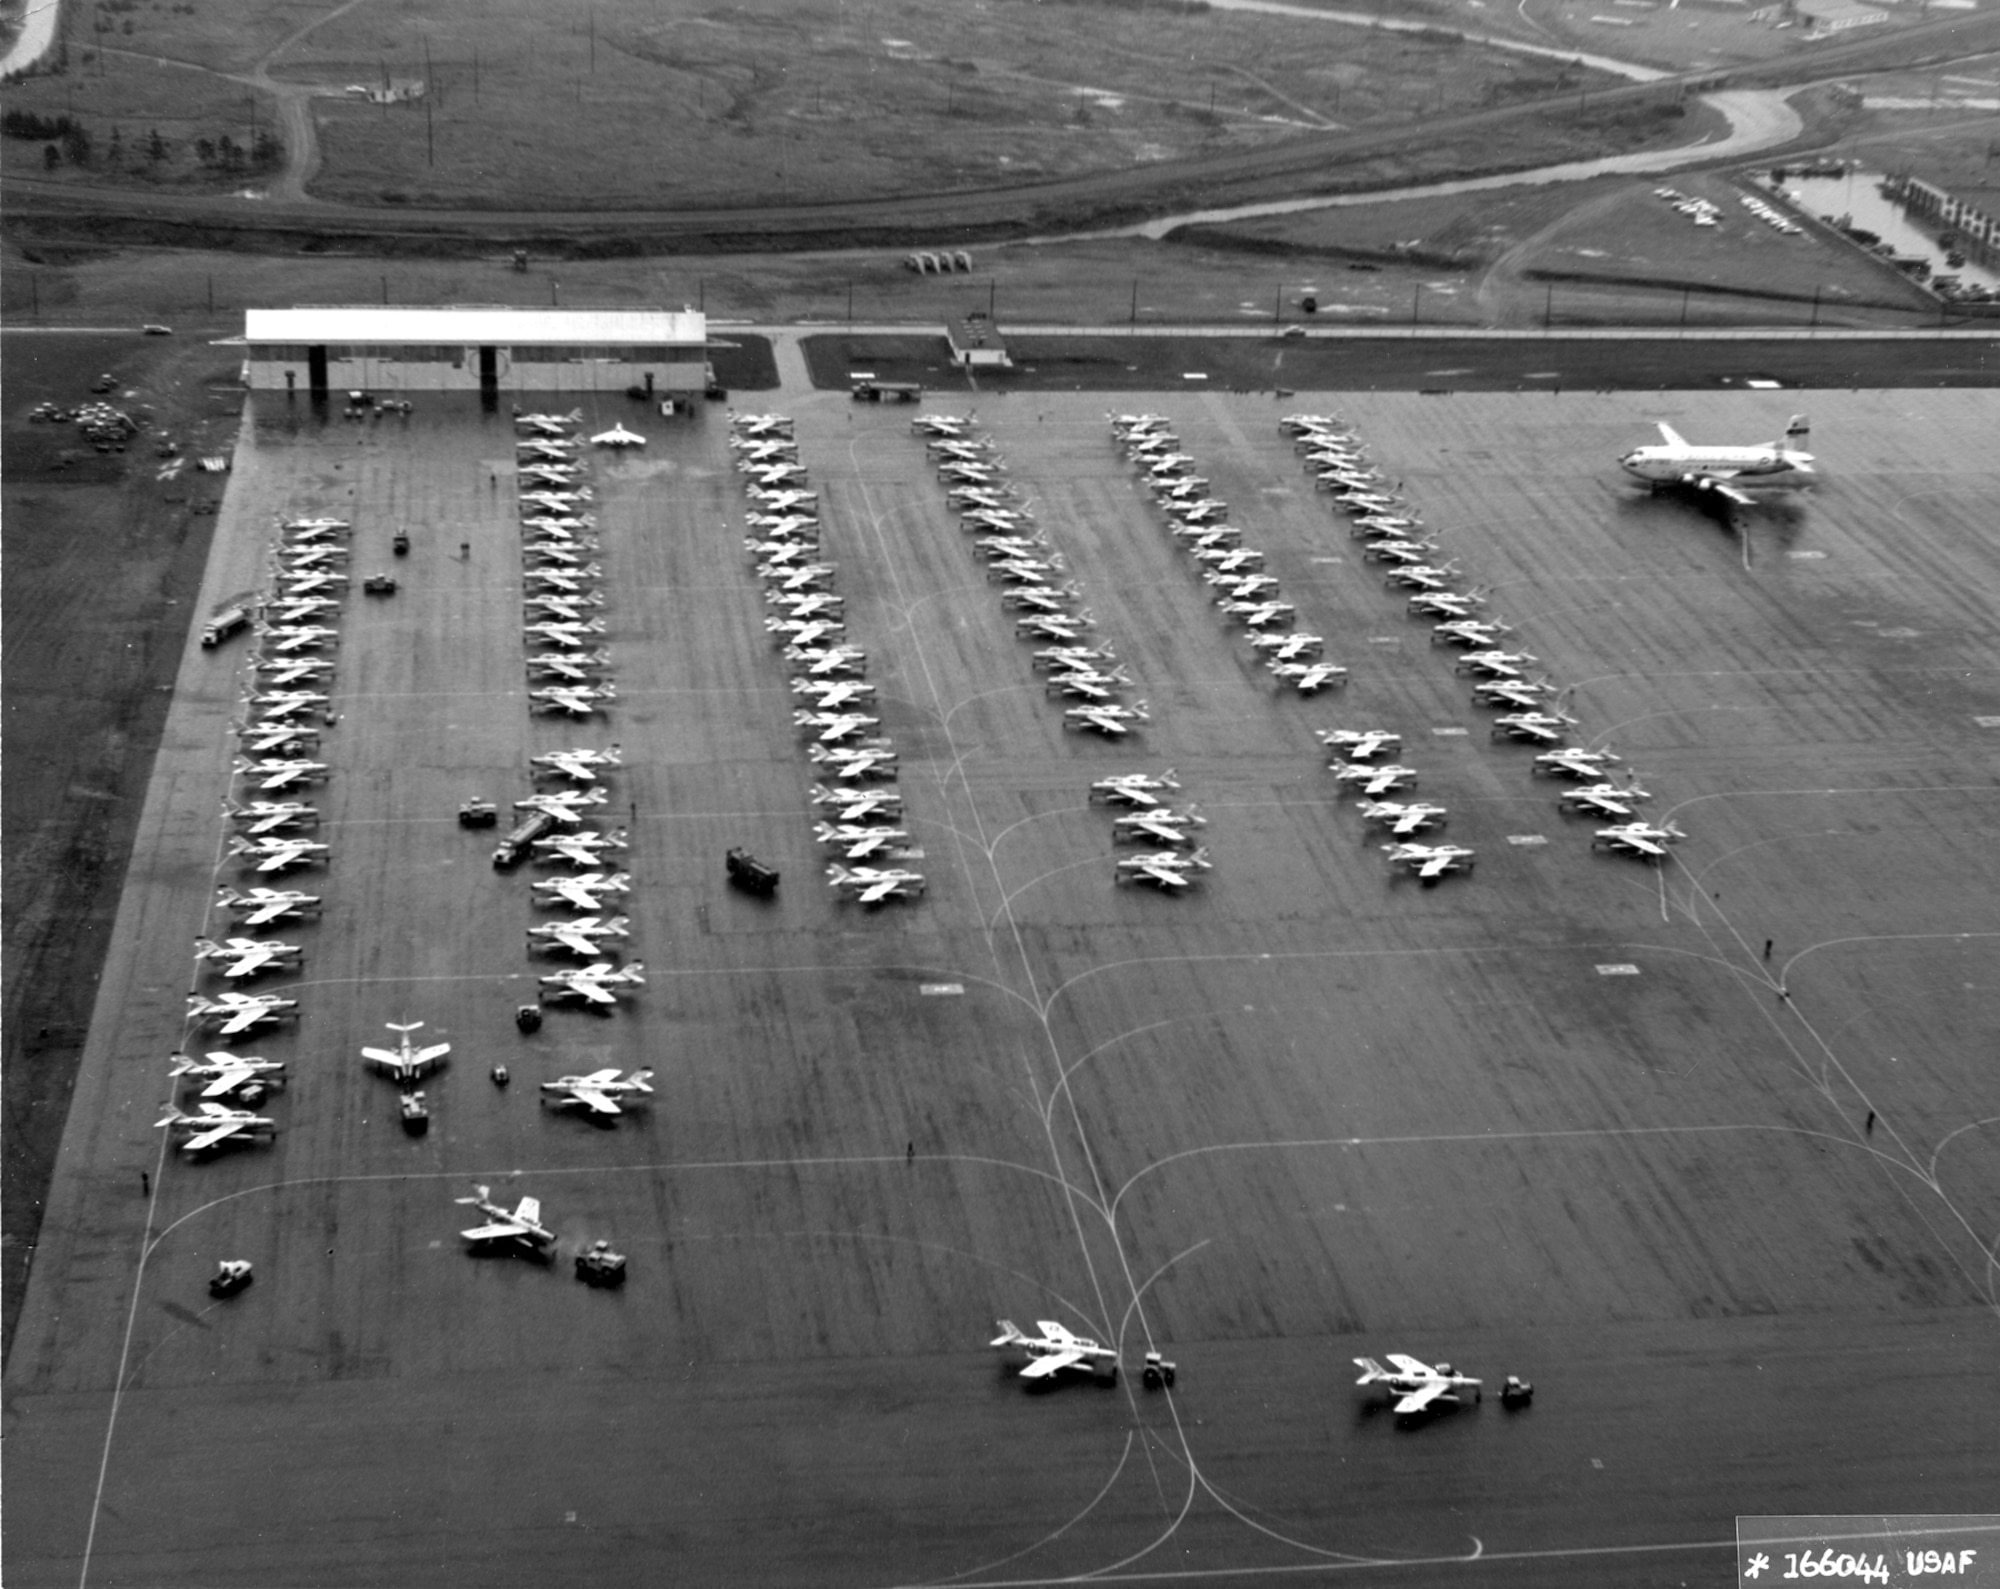 F-84Fs of the Federalized Air National Guard in Newfoundland, November 1961, prior to flying the Atlantic to Europe in response to the Berlin Crisis. Because of the long over-water distance to the next airfield in the Azores, the planes were towed to the end of the runway prior to takeoff to conserve fuel. During this Operation Stair Step deployment of more than 200 fighter aircraft (the largest overseas movement of a fighter force since World War II), not a single plane was lost. (U.S. Air Force photo)